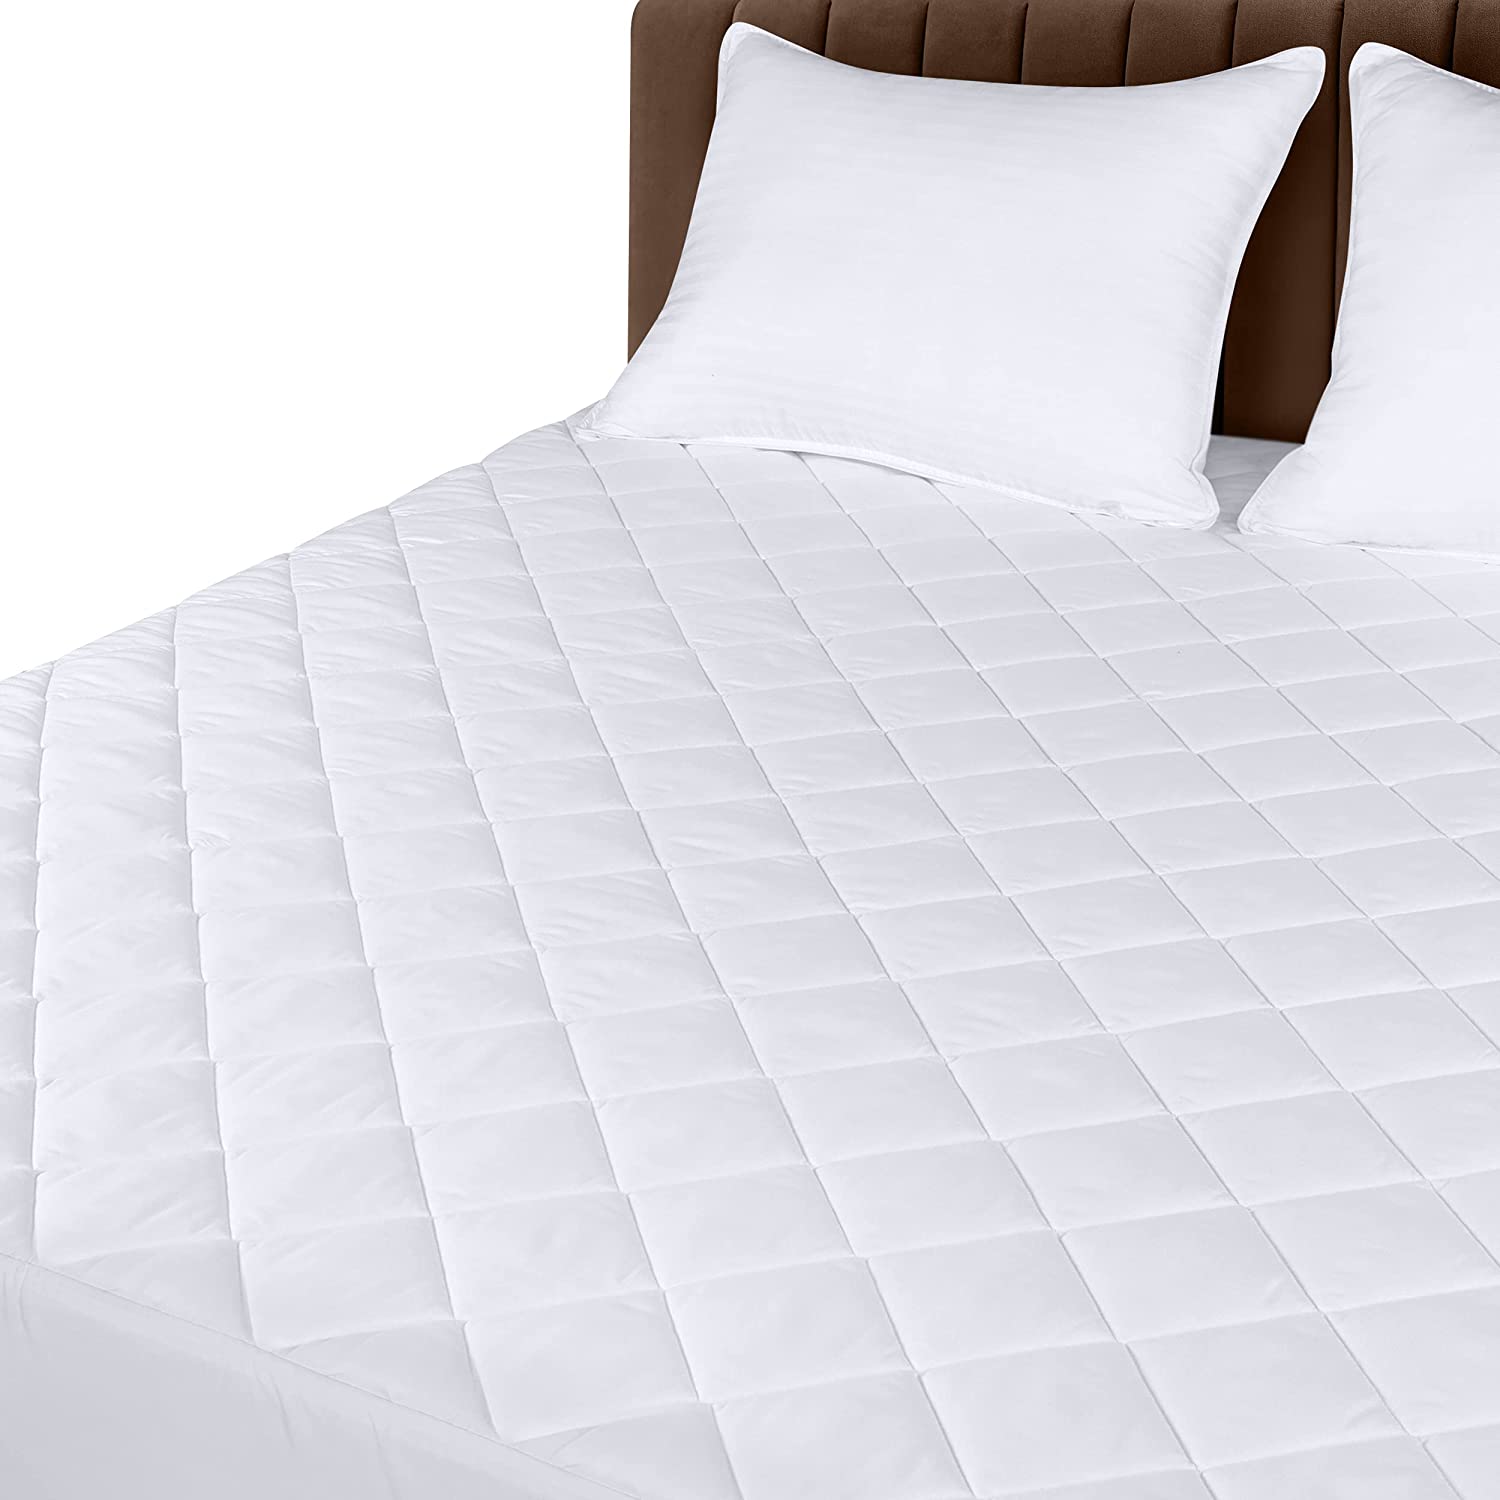 Utopia Bedding Quilted Fitted Mattress Pad (Queen) – Elastic